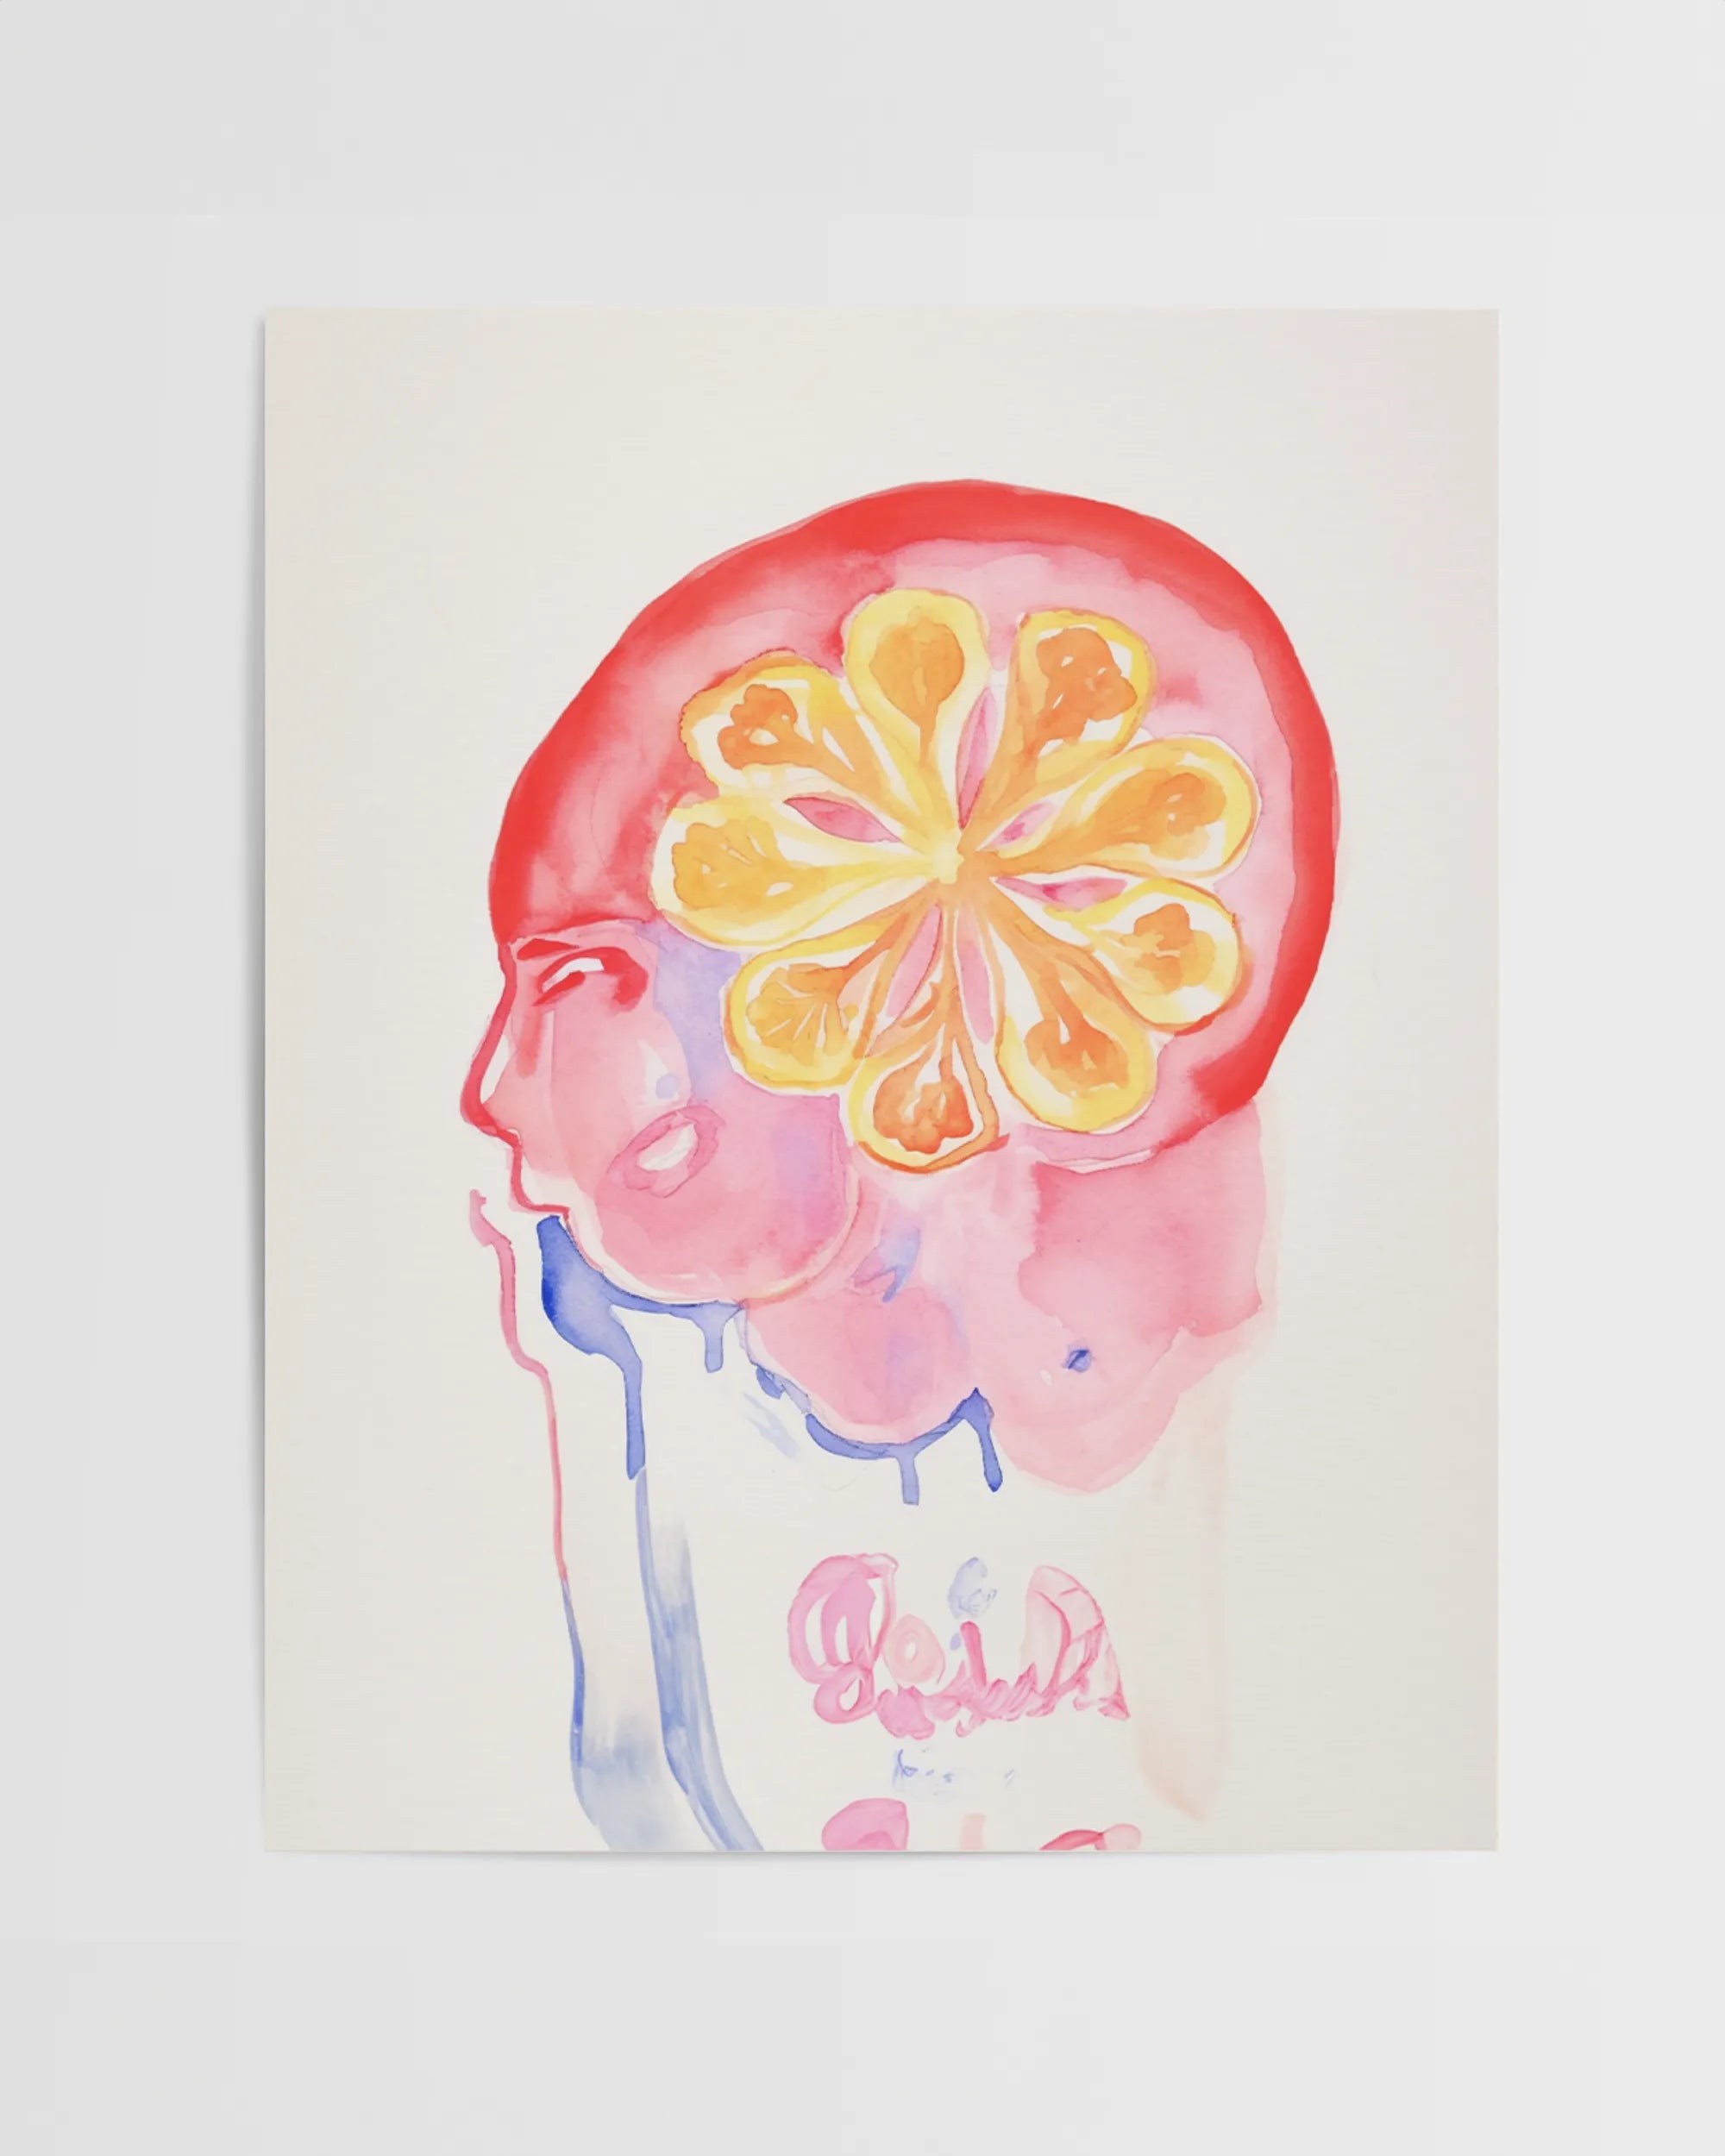 Watercolor art print of a red head with brain made of orange fruit slices on a tan background.